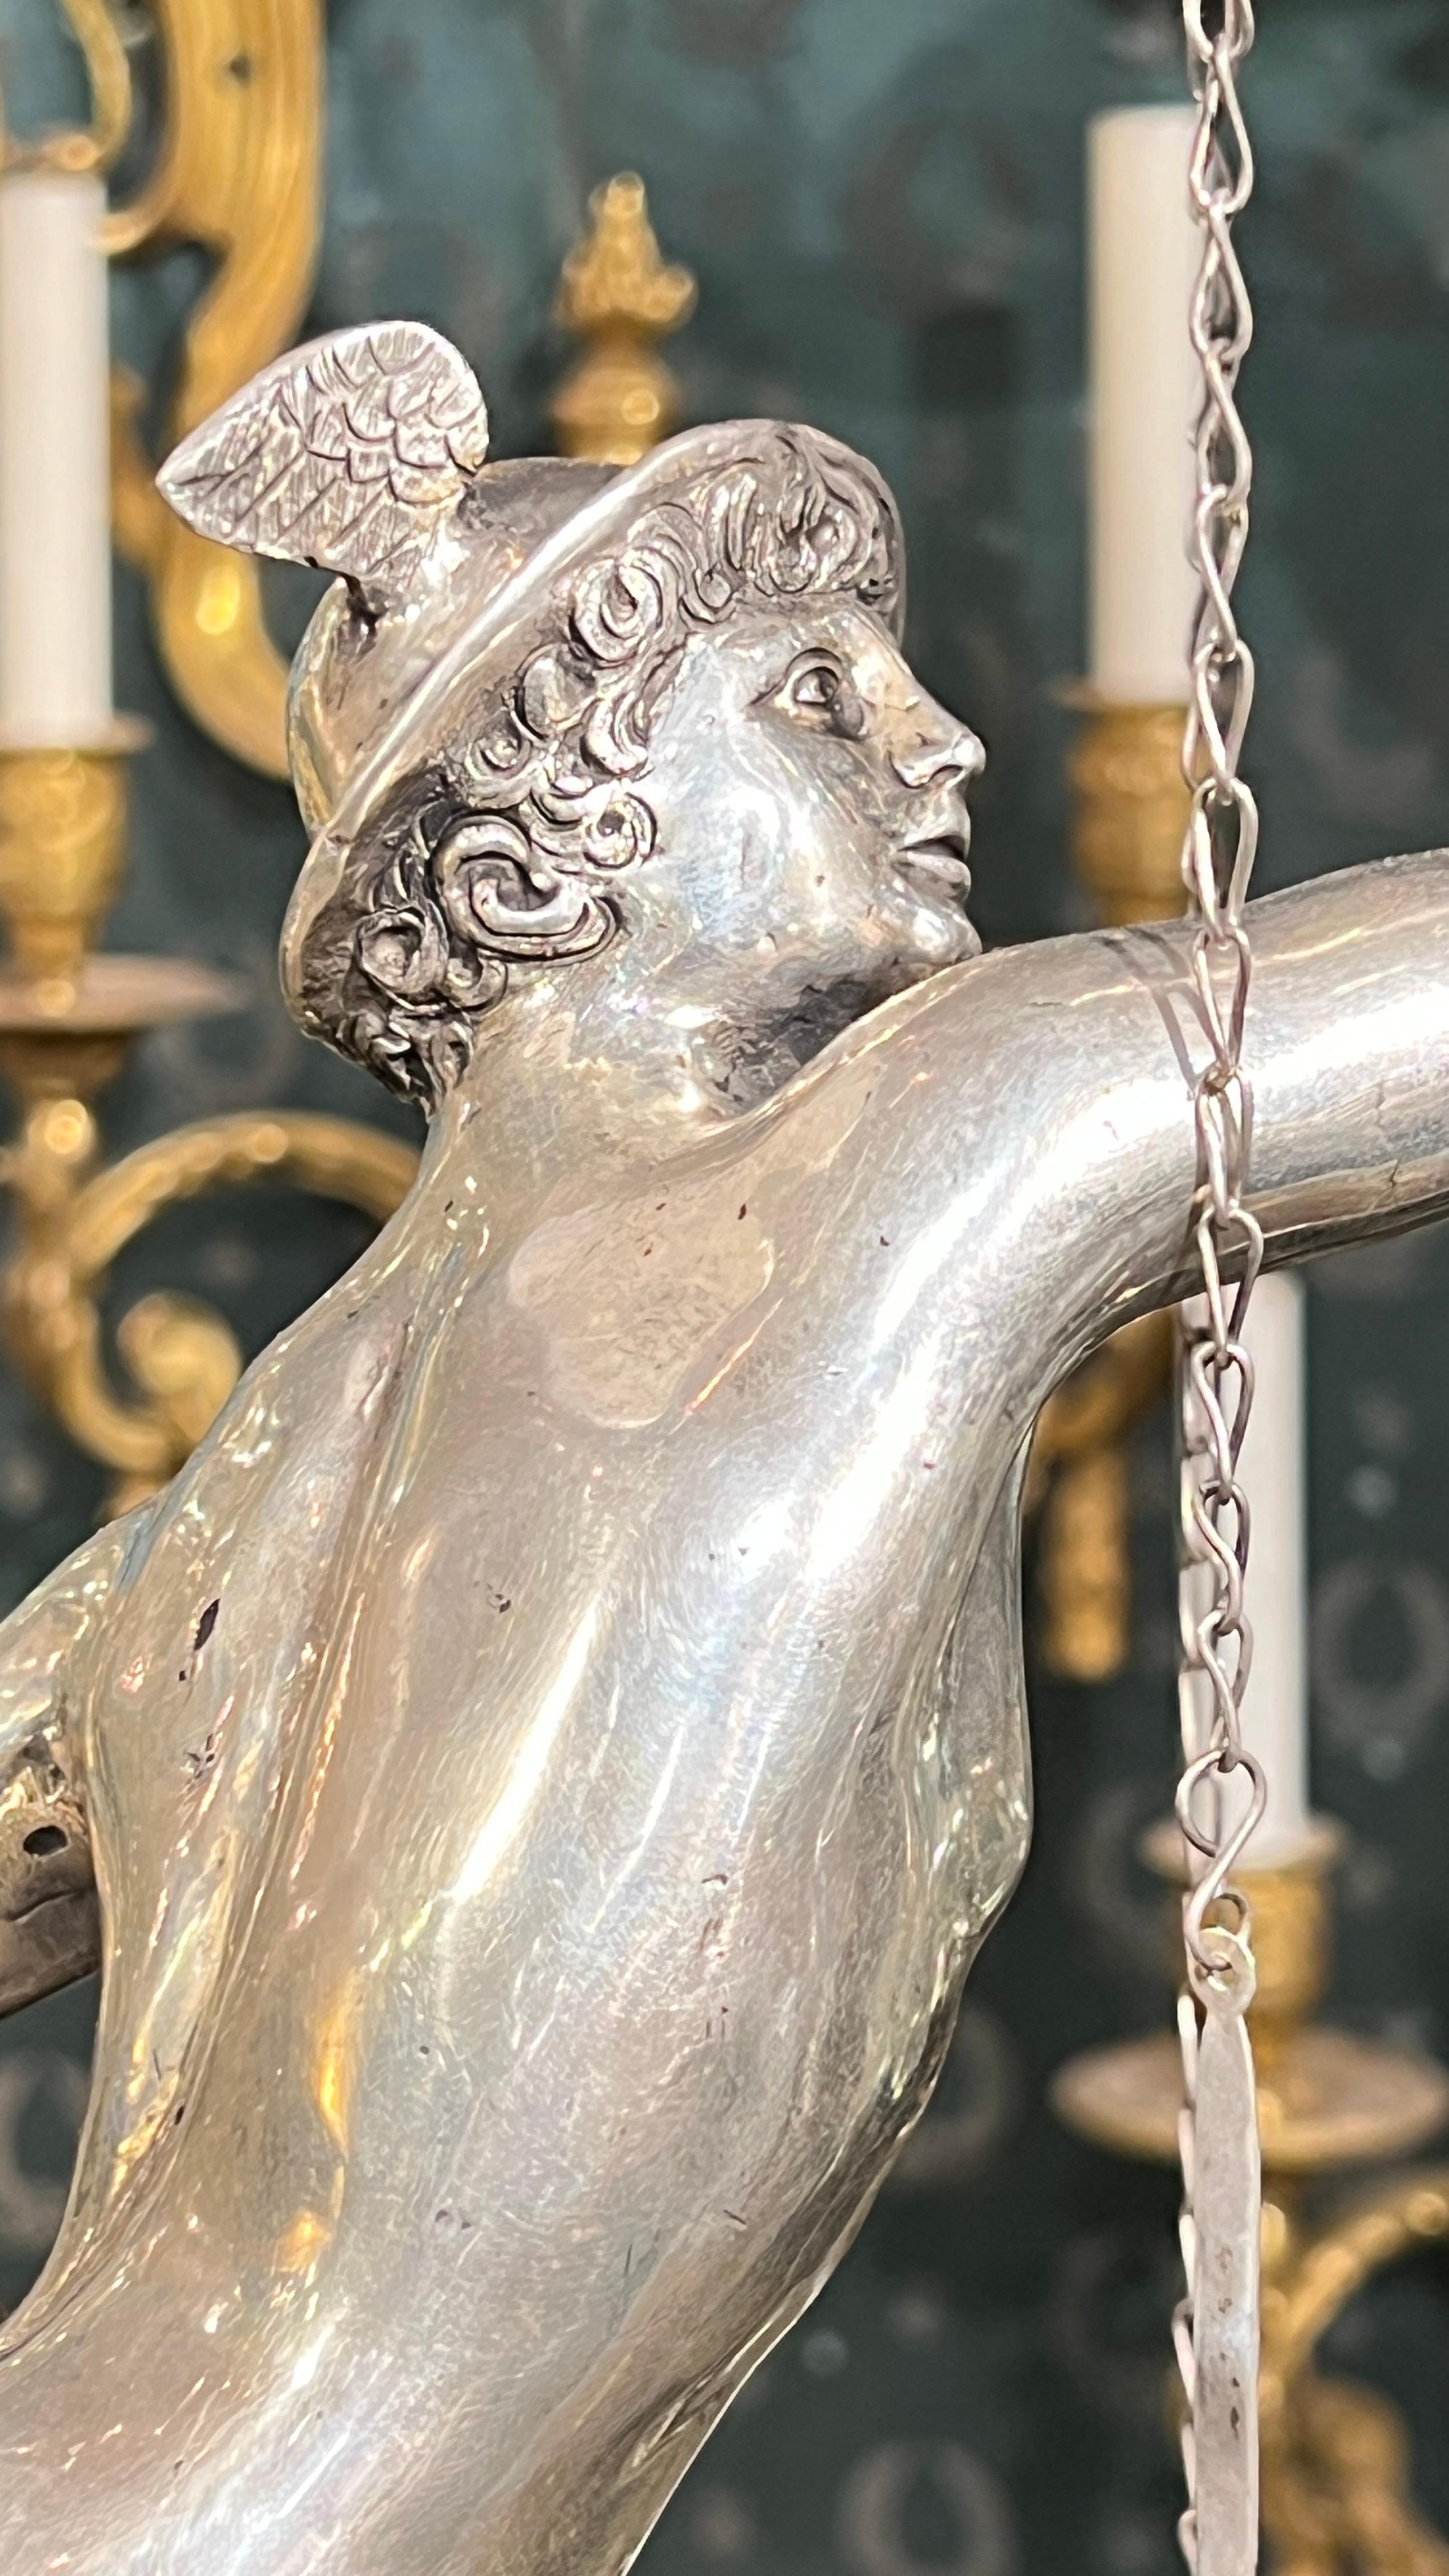 Rare and exceptional 19th century silver oil lamp supported by the figure of Mercury after the model by Giambologna, by the Italian silversmith, Angelo Giannotti (1824-1865) of Bologna, circa 1850s. With the Papal State mark and mark of the maker